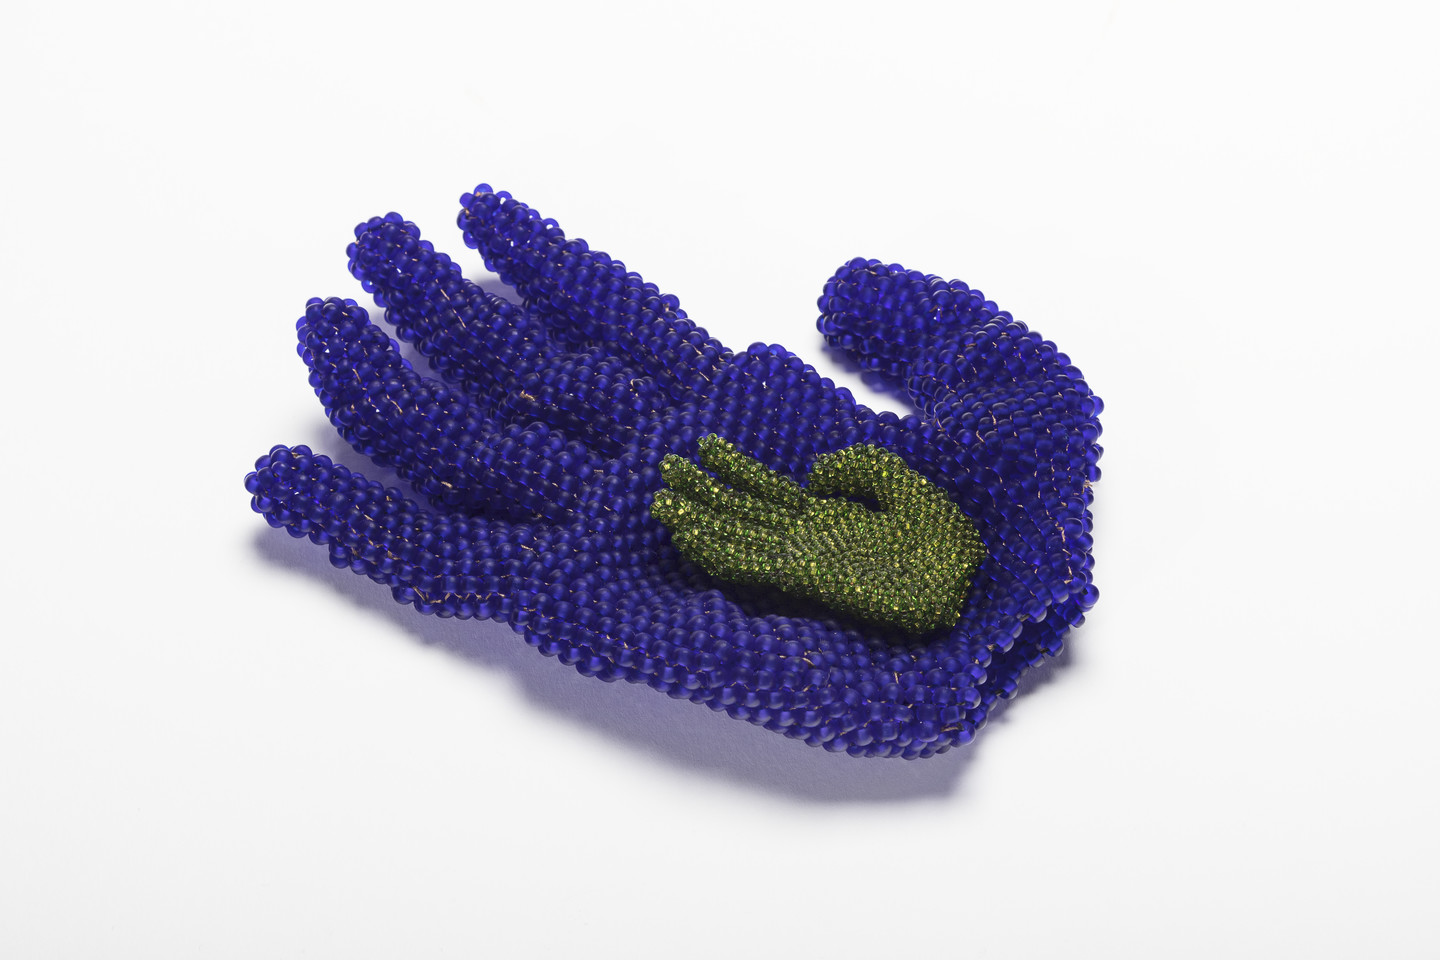 A beaded sculpture of two hands. A larger hand, made of blue glass beads, rests palm up. It cradles a smaller hand made of green glass beads, which is centered in the same position in the larger hand’s palm.